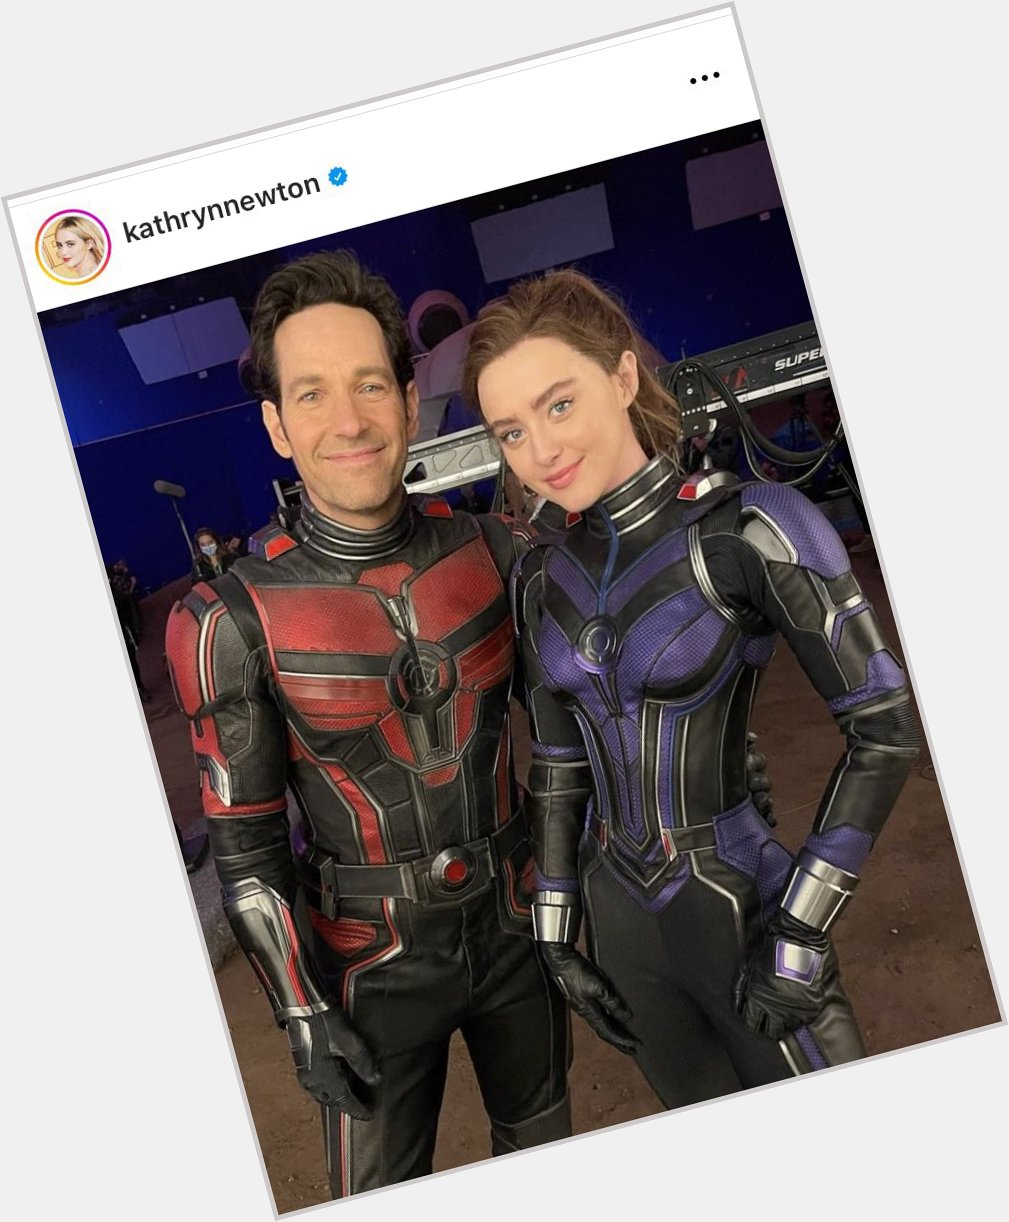  updates on instagram an old photo from the set wishing Paul Rudd a happy birthday! 